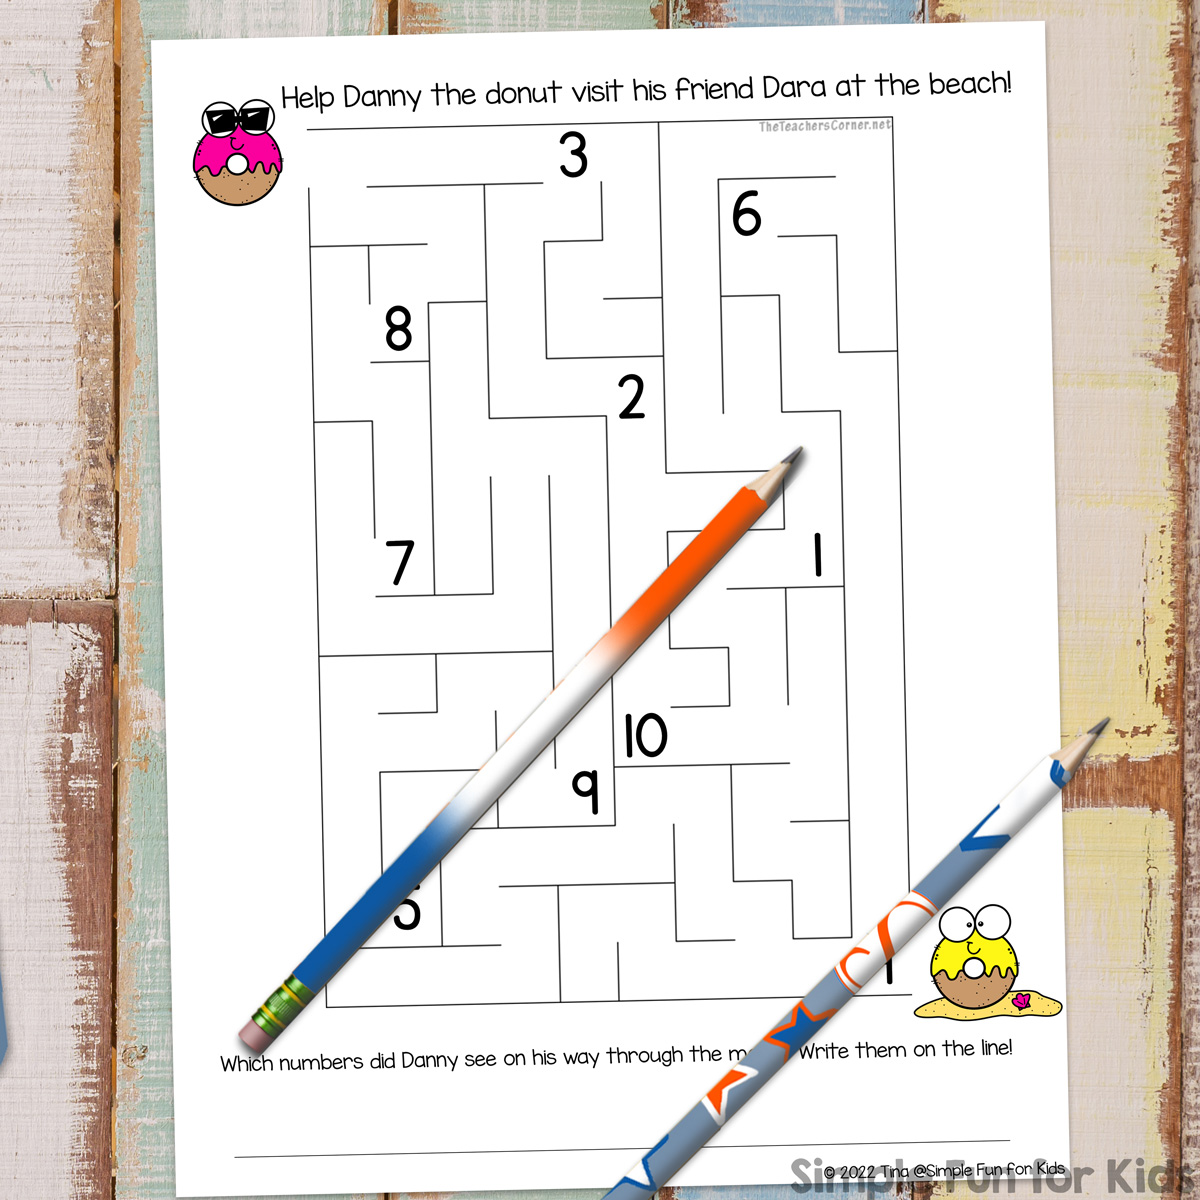 Summer Donuts Number Maze printable on top of a wooden desktop with two pencils. At bottom right, there's a Simple Fun for Kids watermark.